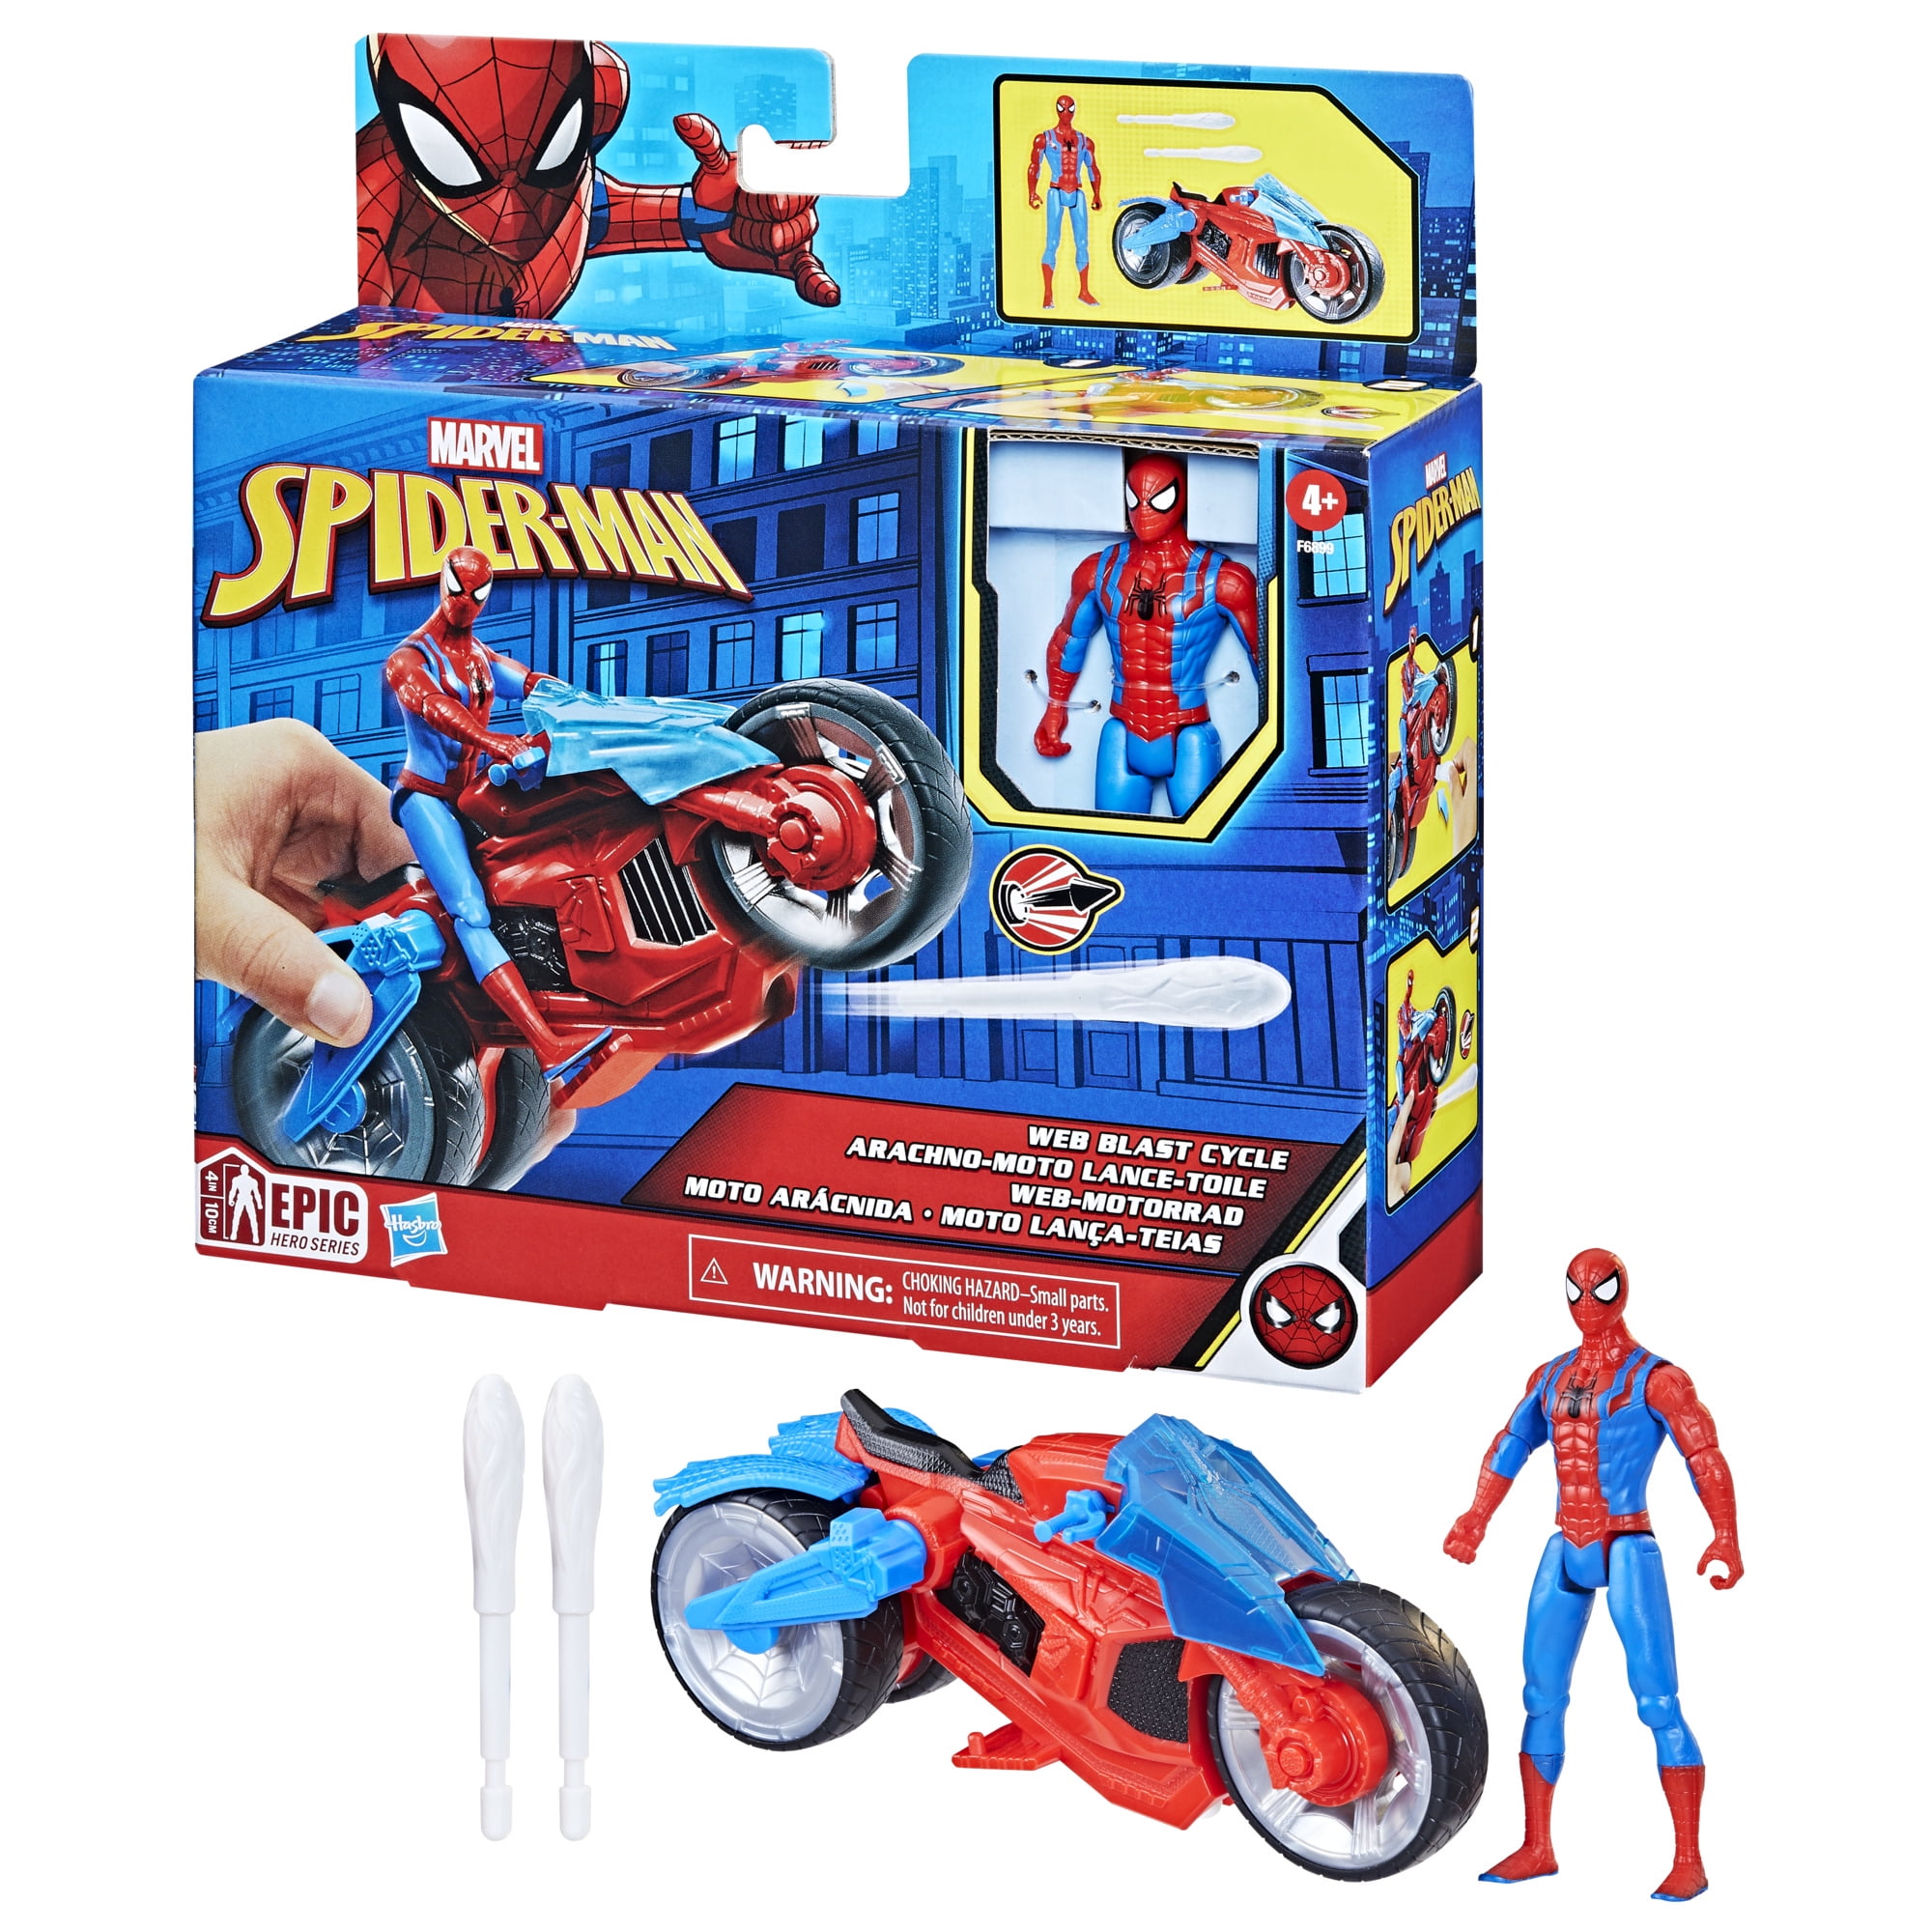  Marvel Spider-Man Car Playset with Blast Feature and Action  Figure for Kids Ages 4 and Up : Toys & Games